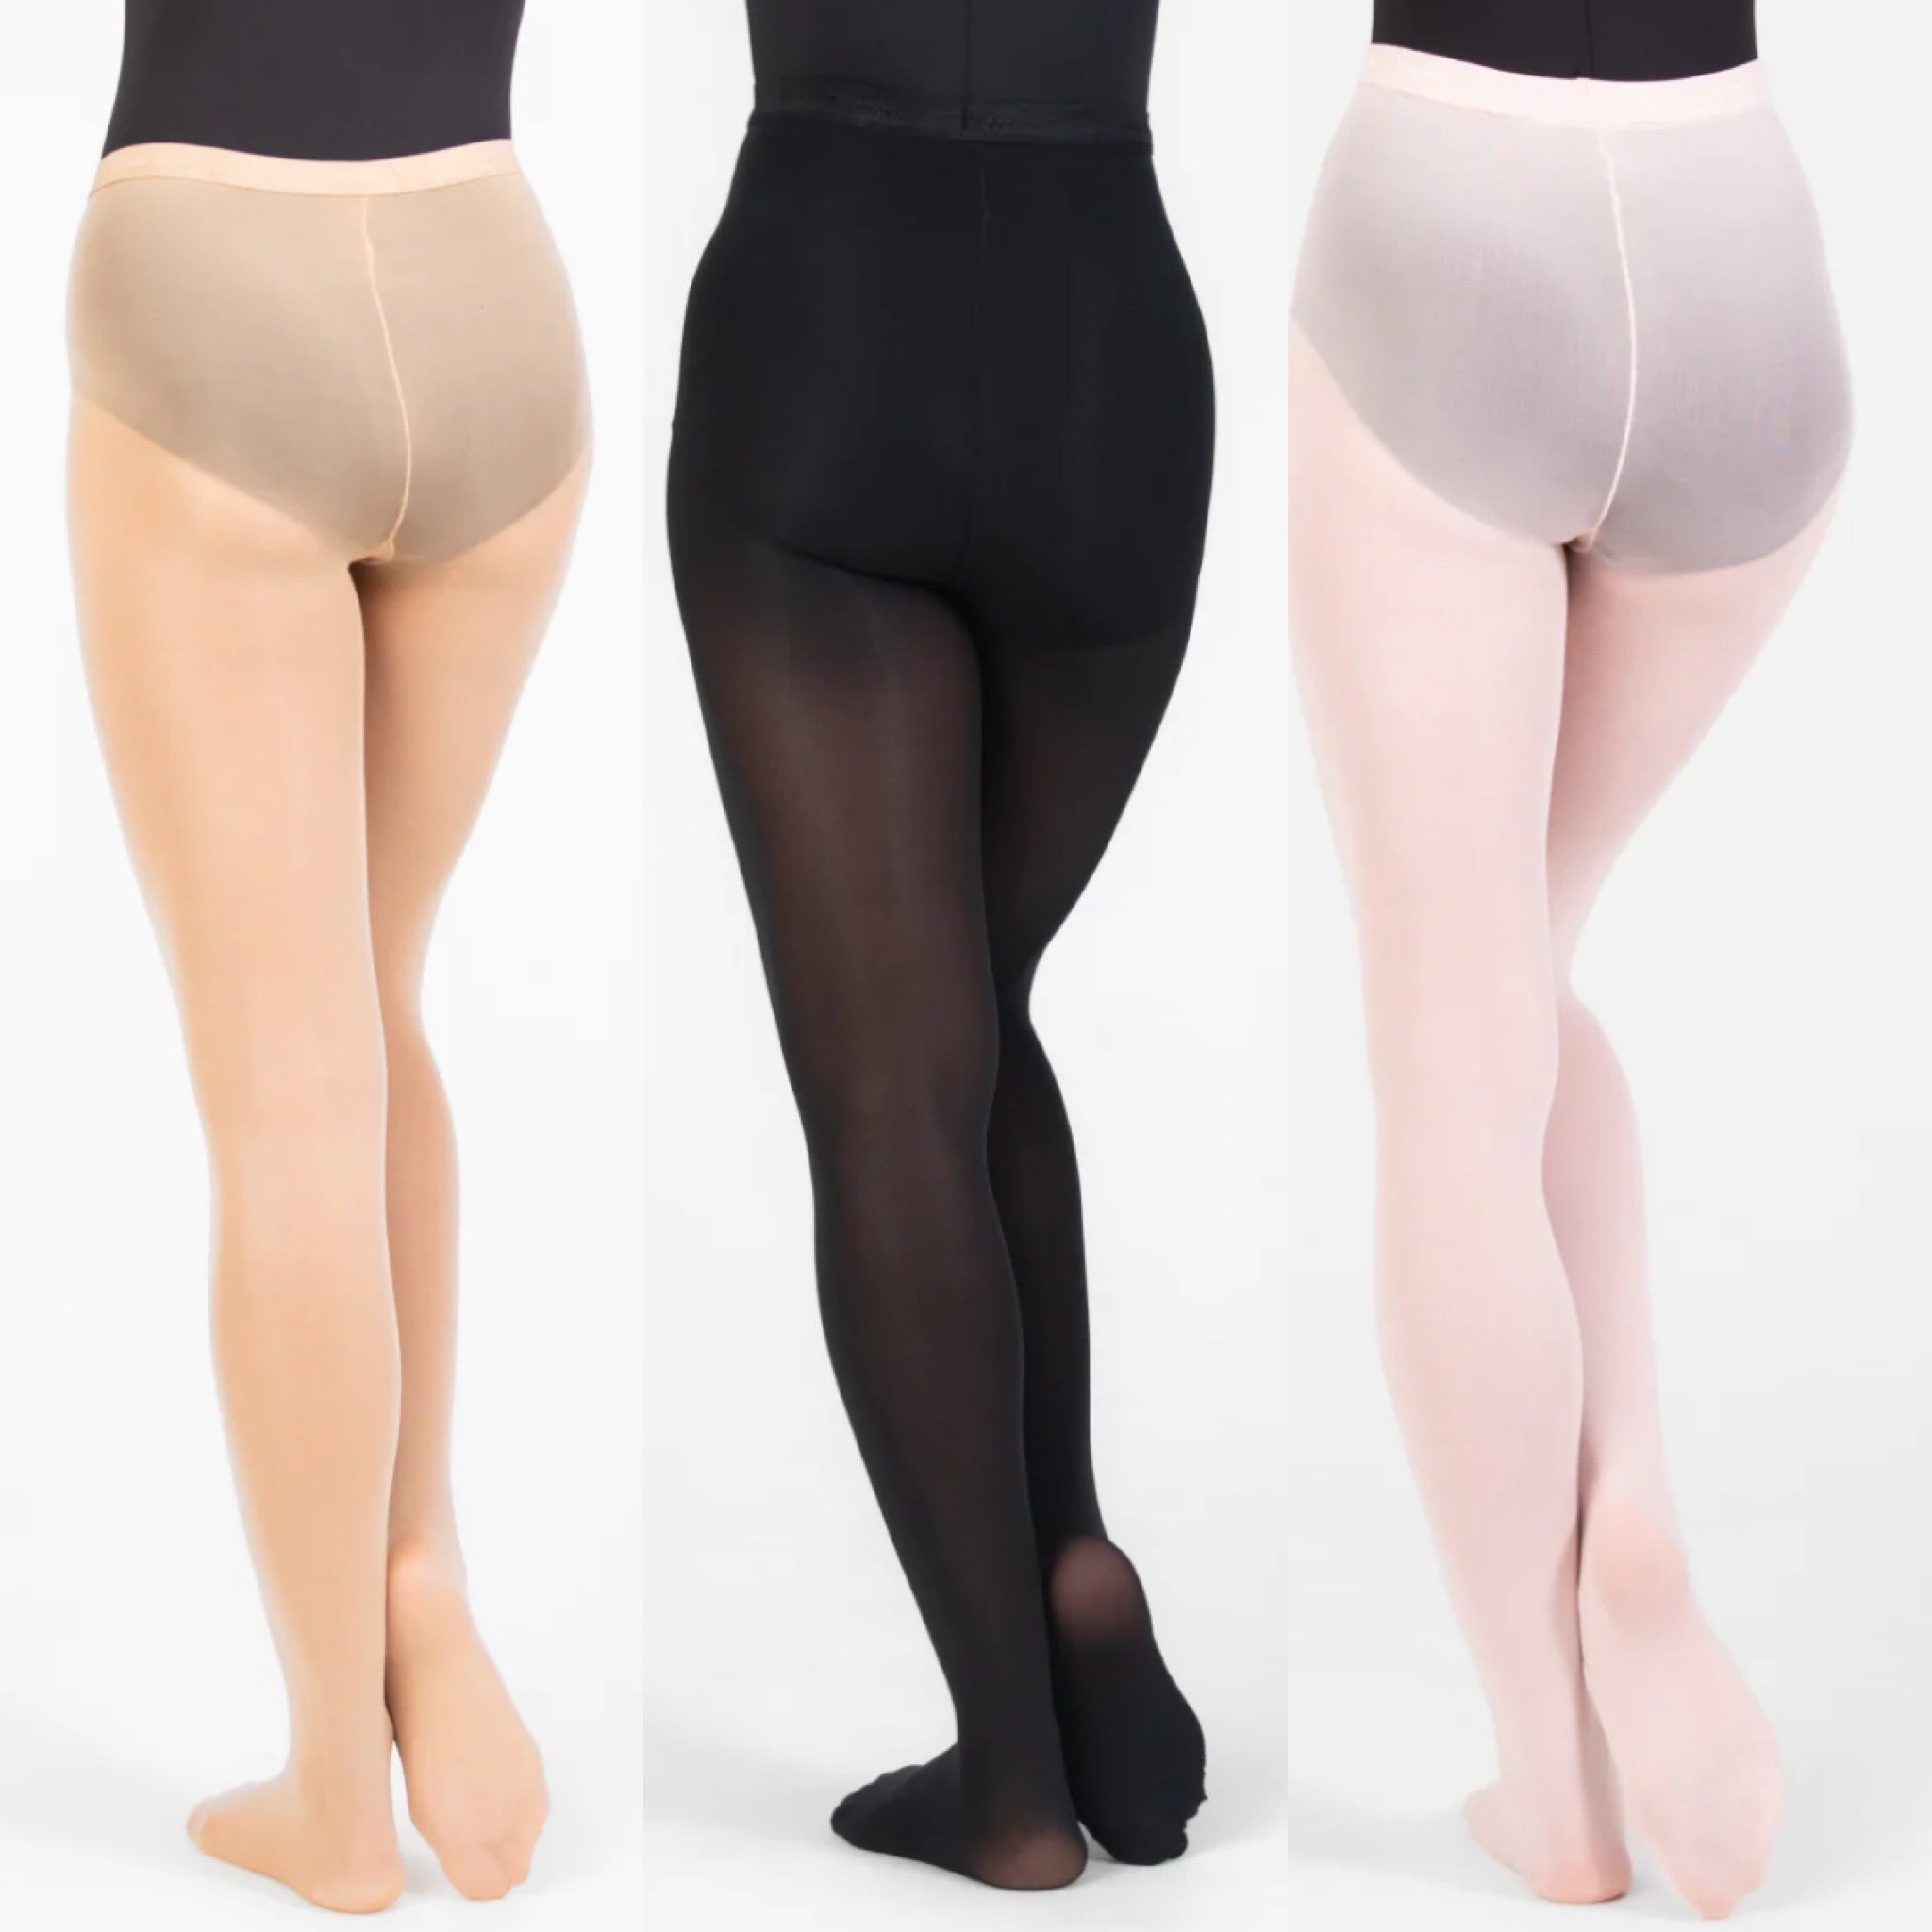  Body Wrappers Womens Footless Tights A33X (Suntan, 3X